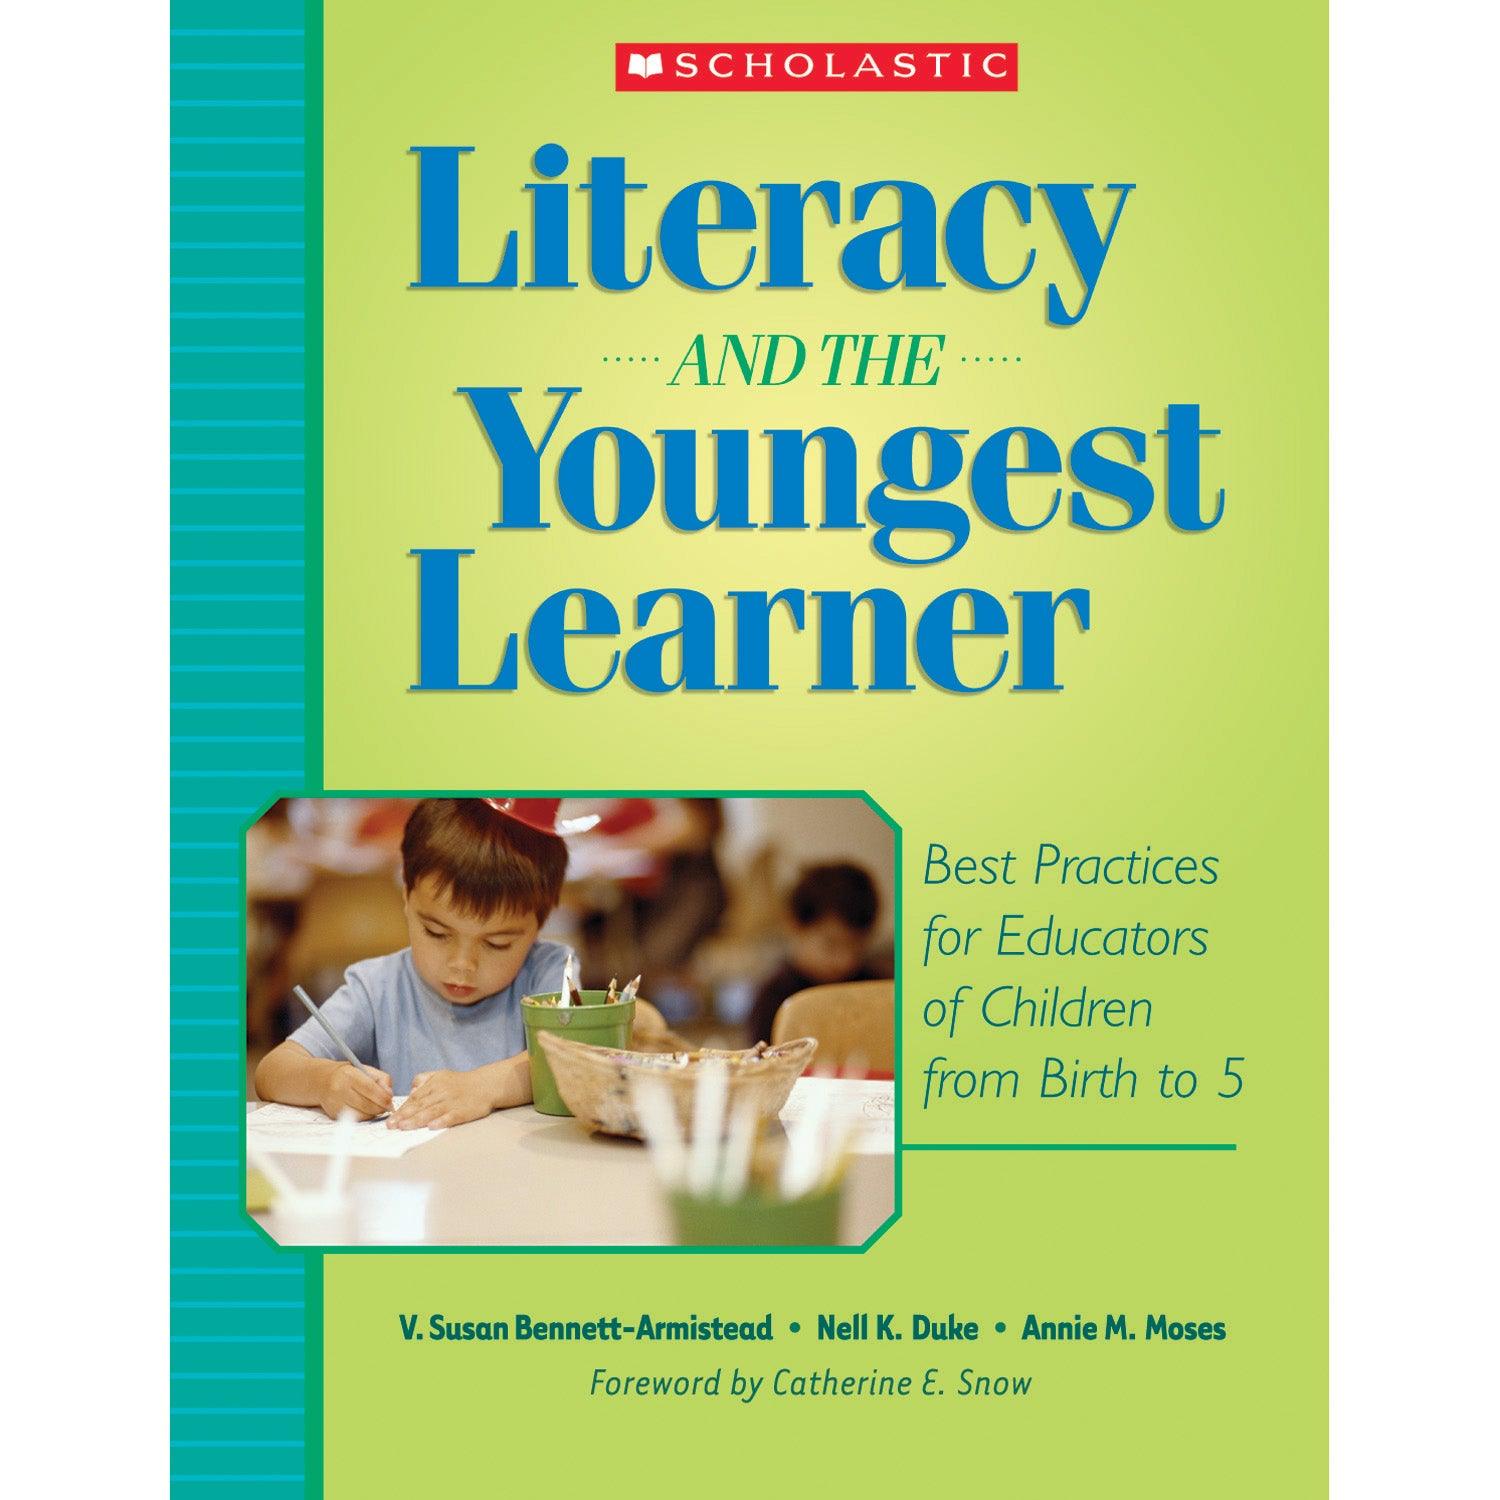 Literacy and the Youngest Learner - Loomini